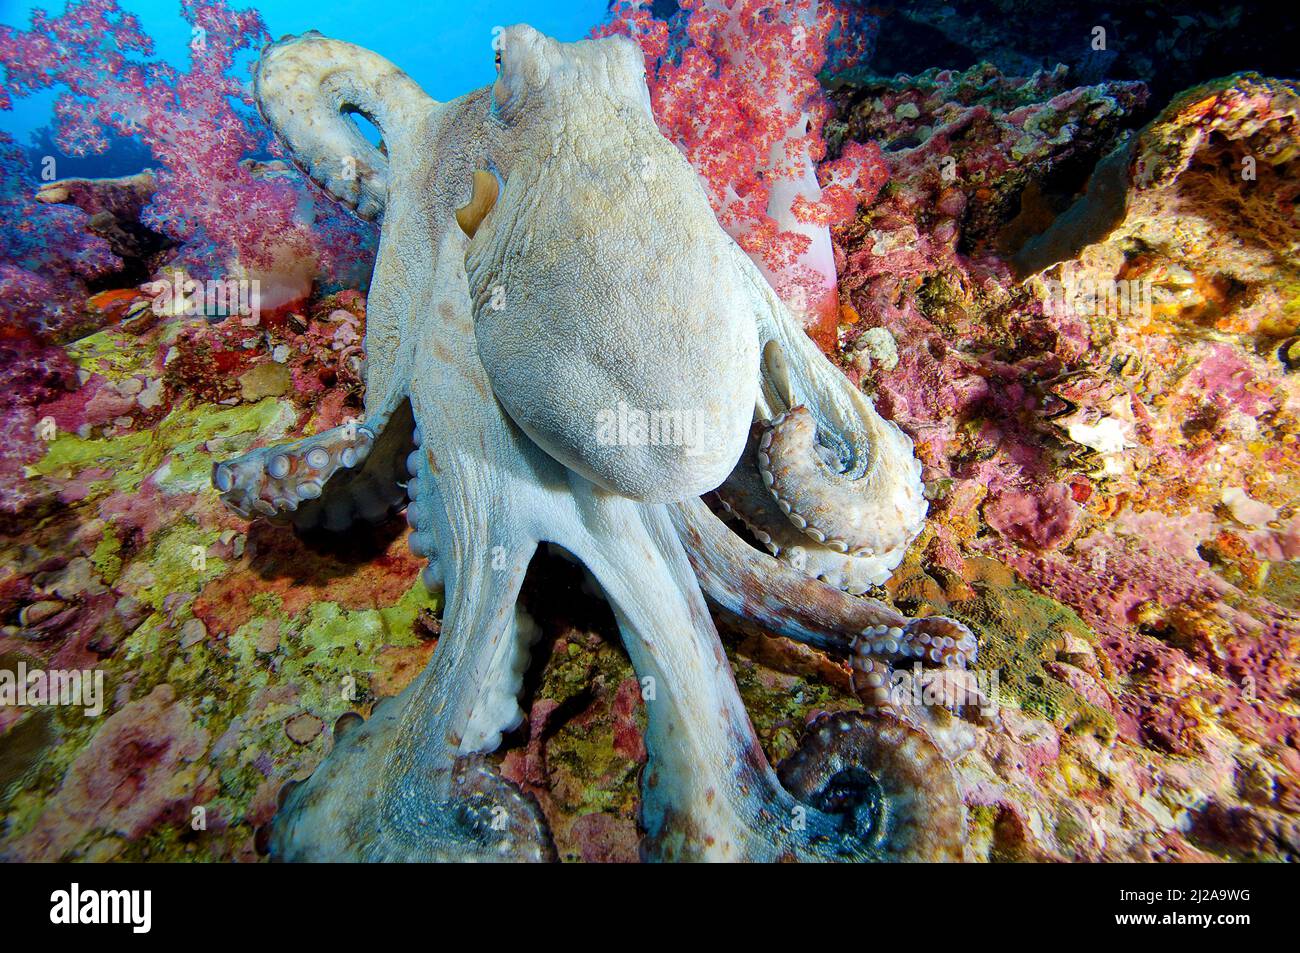 Big blue Octopus or Reef Octopus (Octopus cyanea) in a coral reef, Similan islands, Thailand Stock Photo